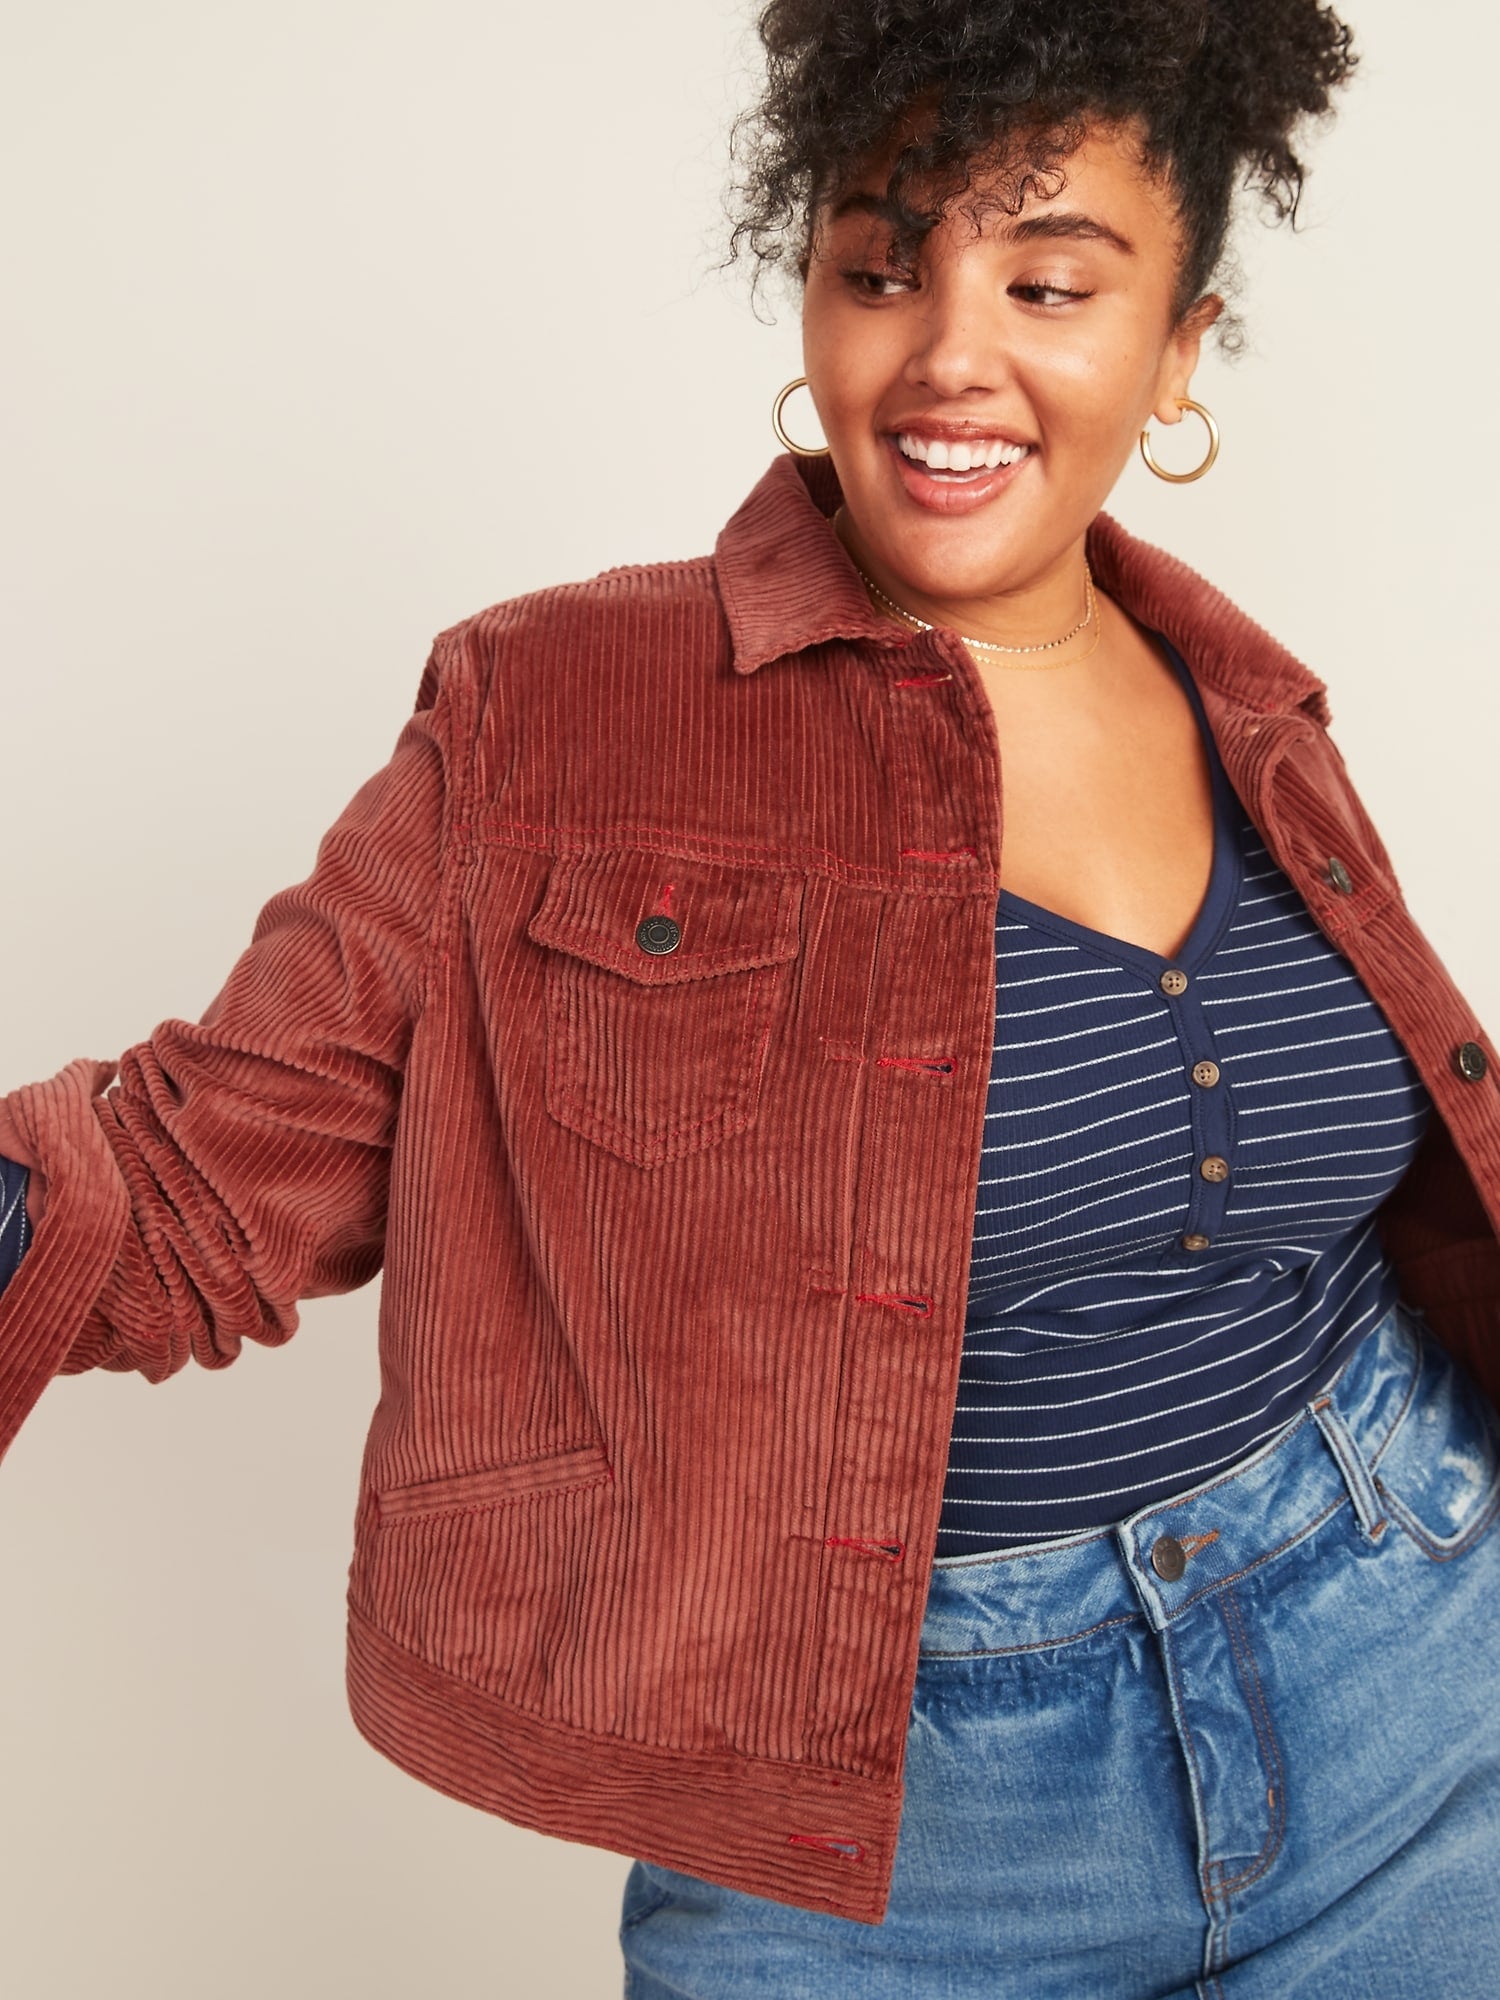 Plus Size Clothes At Old Navy | 2020 